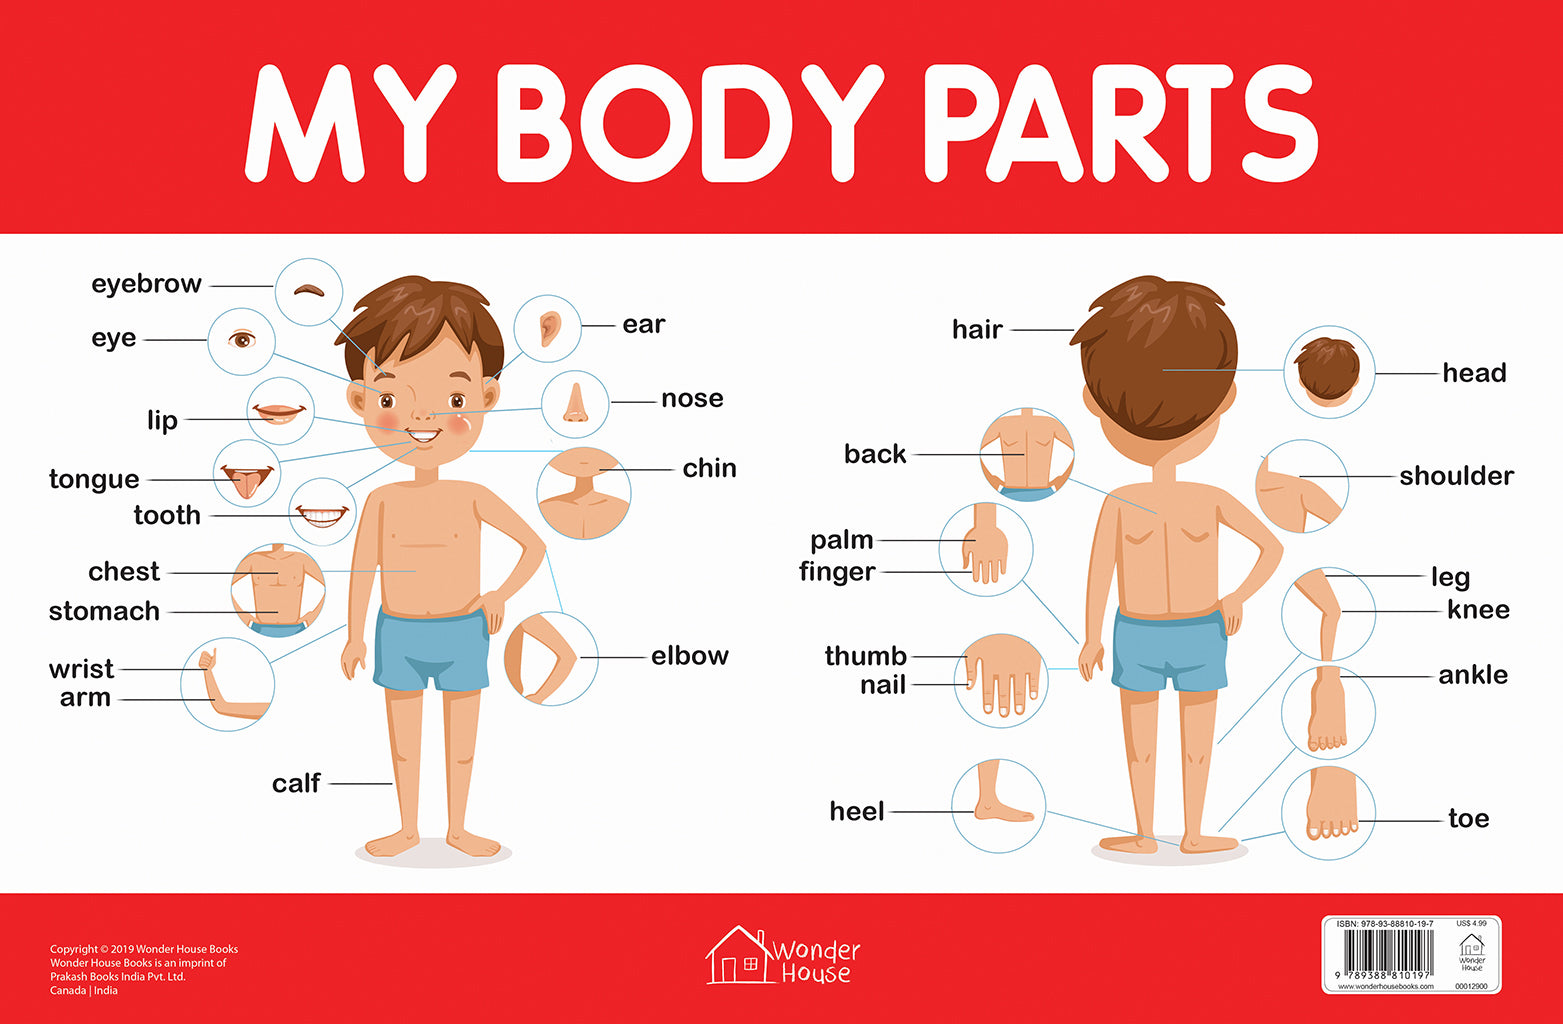 My Body Parts - Early Learning Educational Posters For Children: Perfect For Kindergarten, Nursery and Homeschooling (19 Inches X 29 Inches)